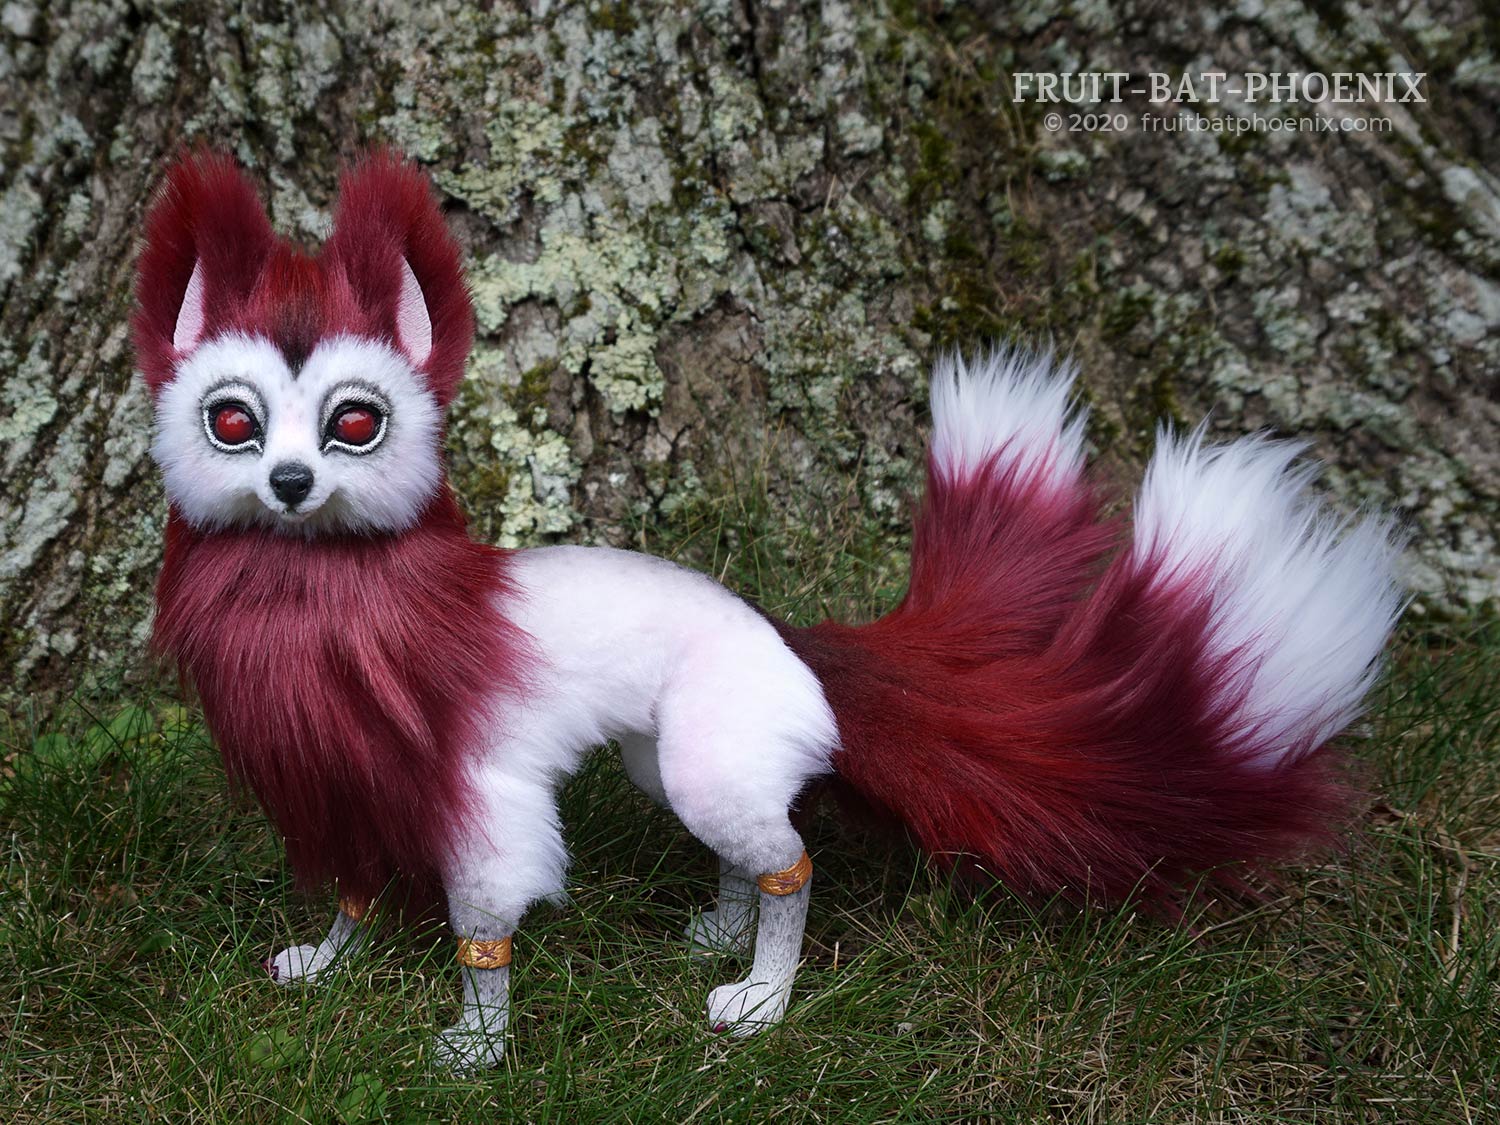 Burgundy and white kitsune posable art doll with three tails